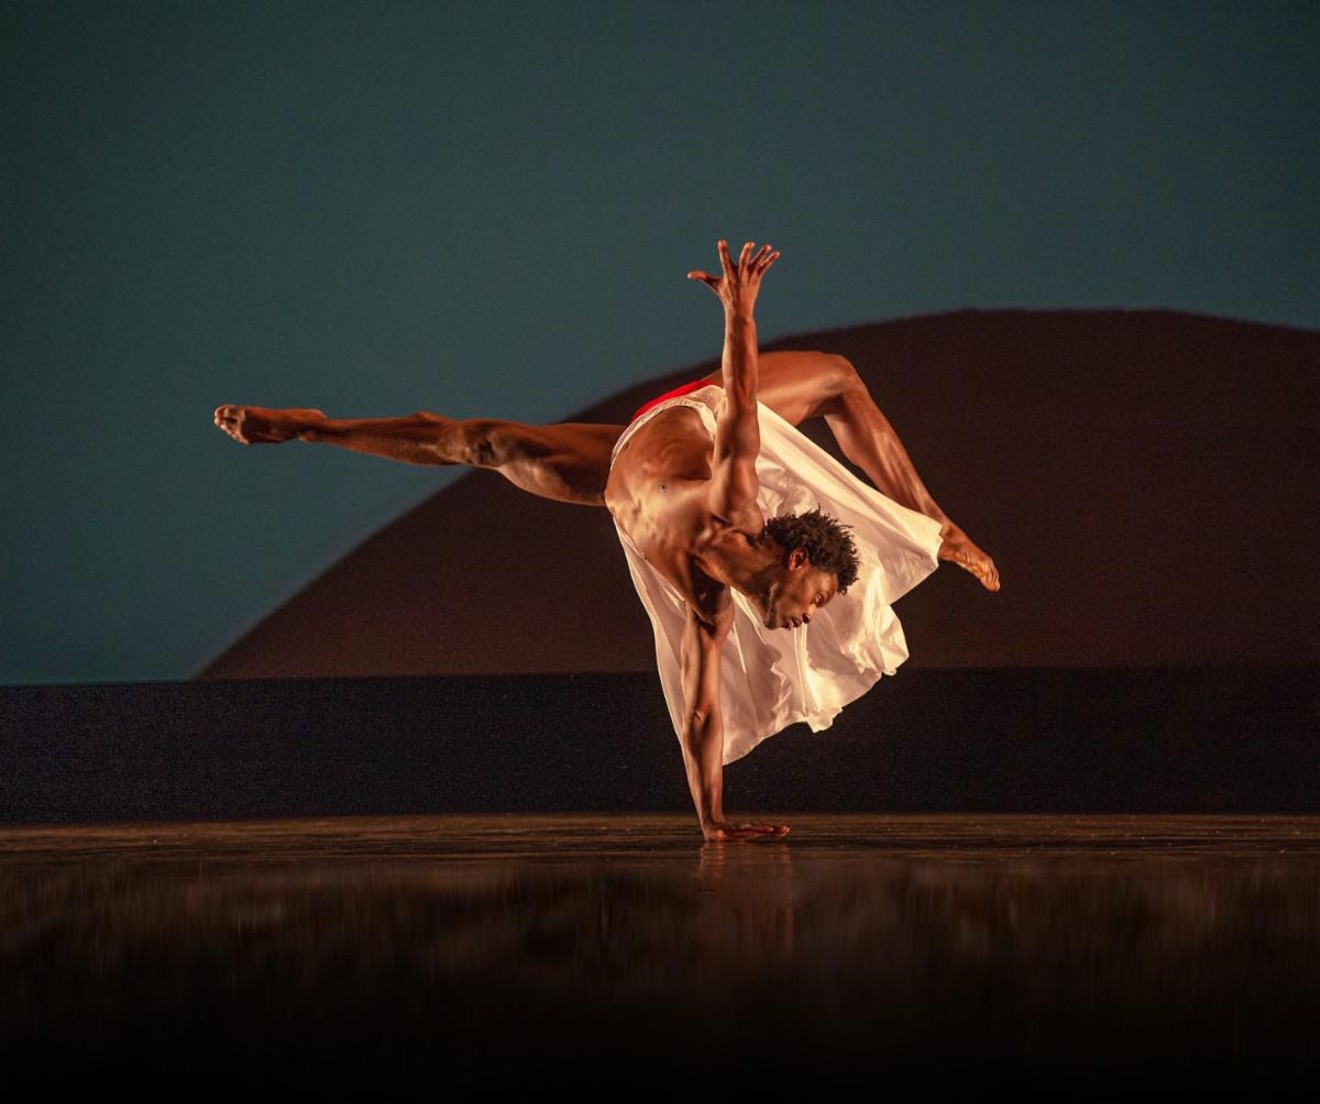 Leon Cobb of the Peter London Global Dance Company is one of the dancers who will perform with the company in "Edge of Tomorrow" at the Adrienne Arsht Center for the Performing Arts.